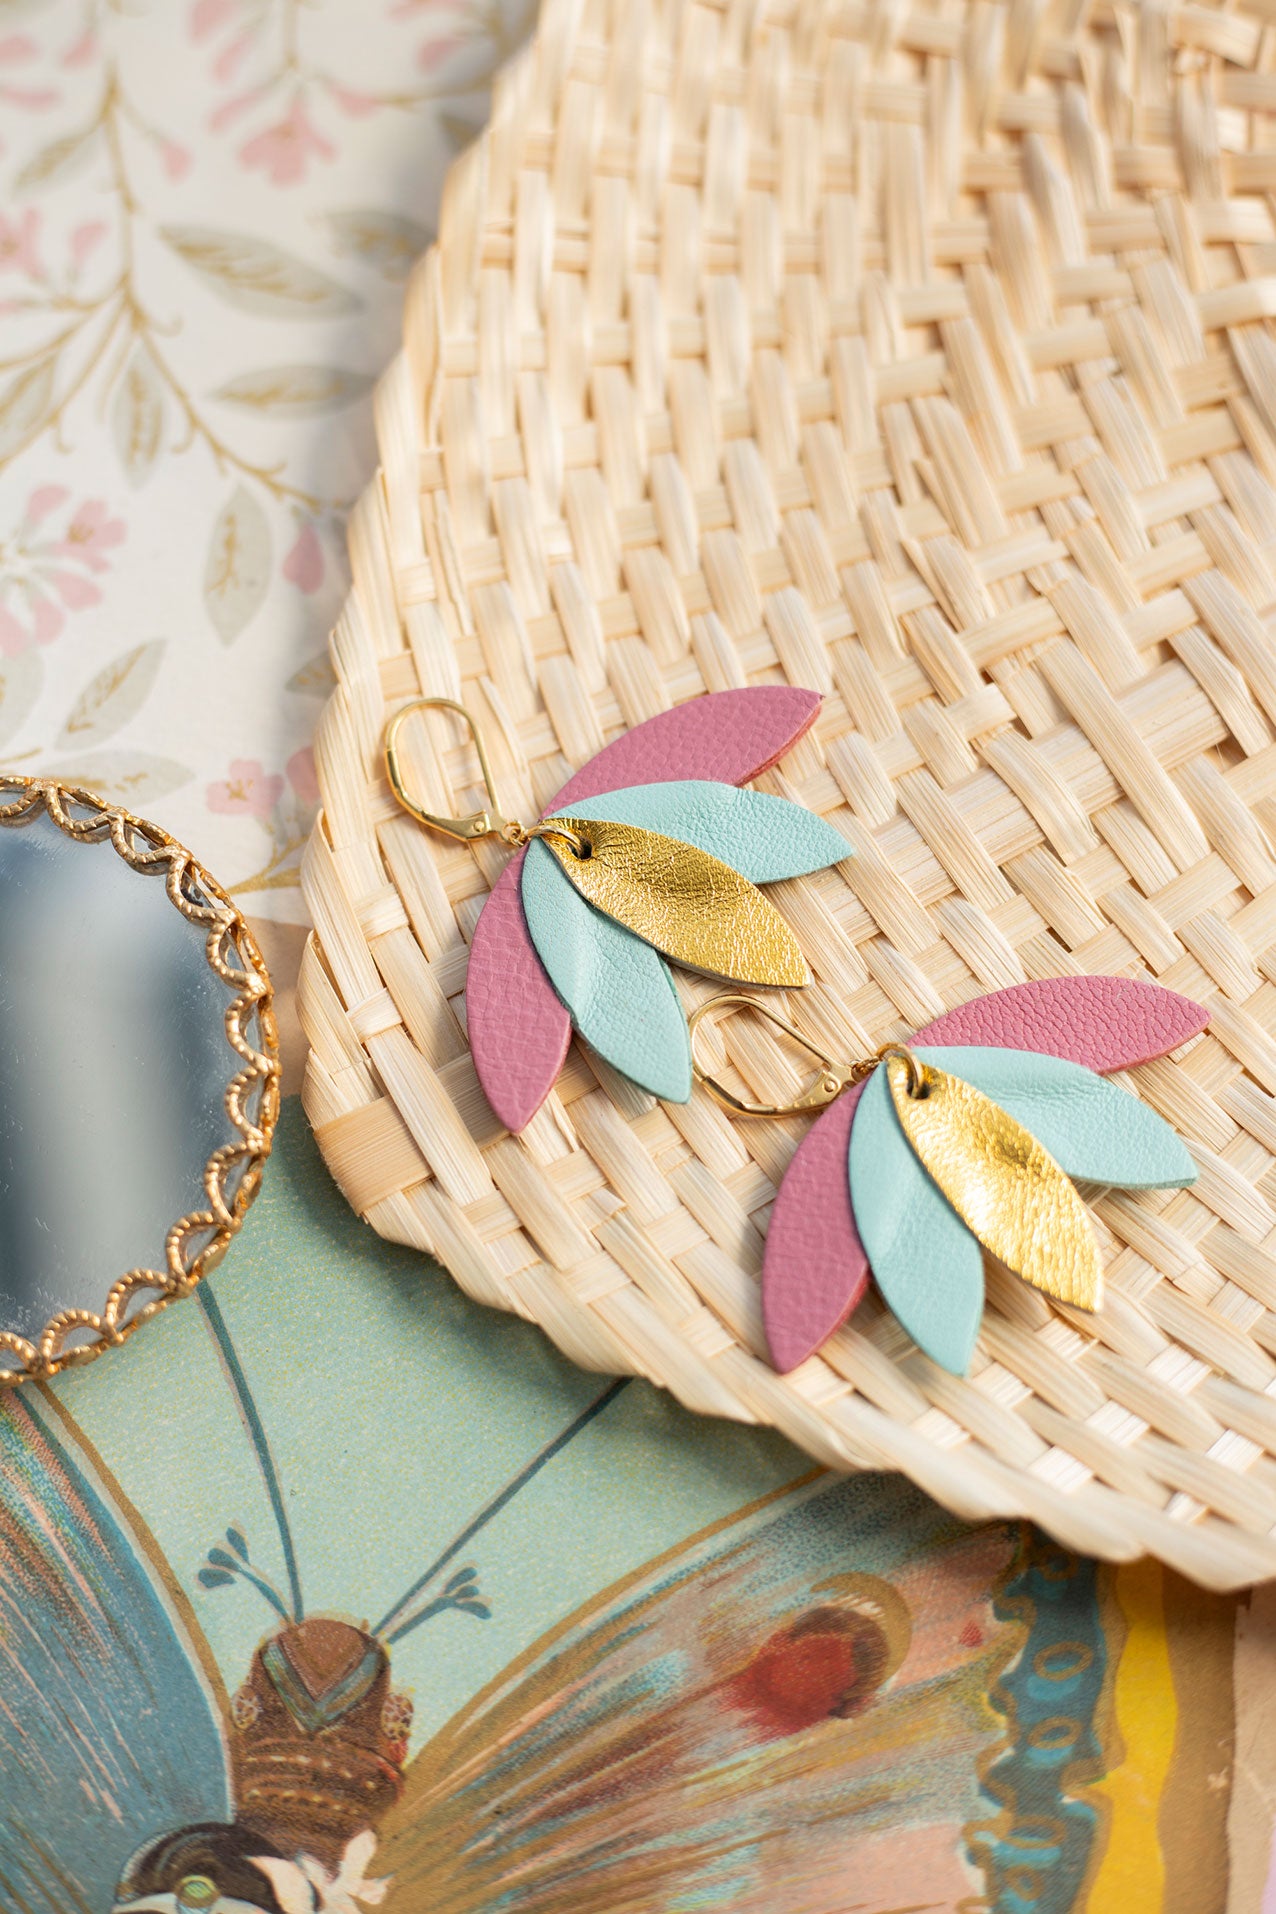 Palmier earrings in pink, blue and gold leather